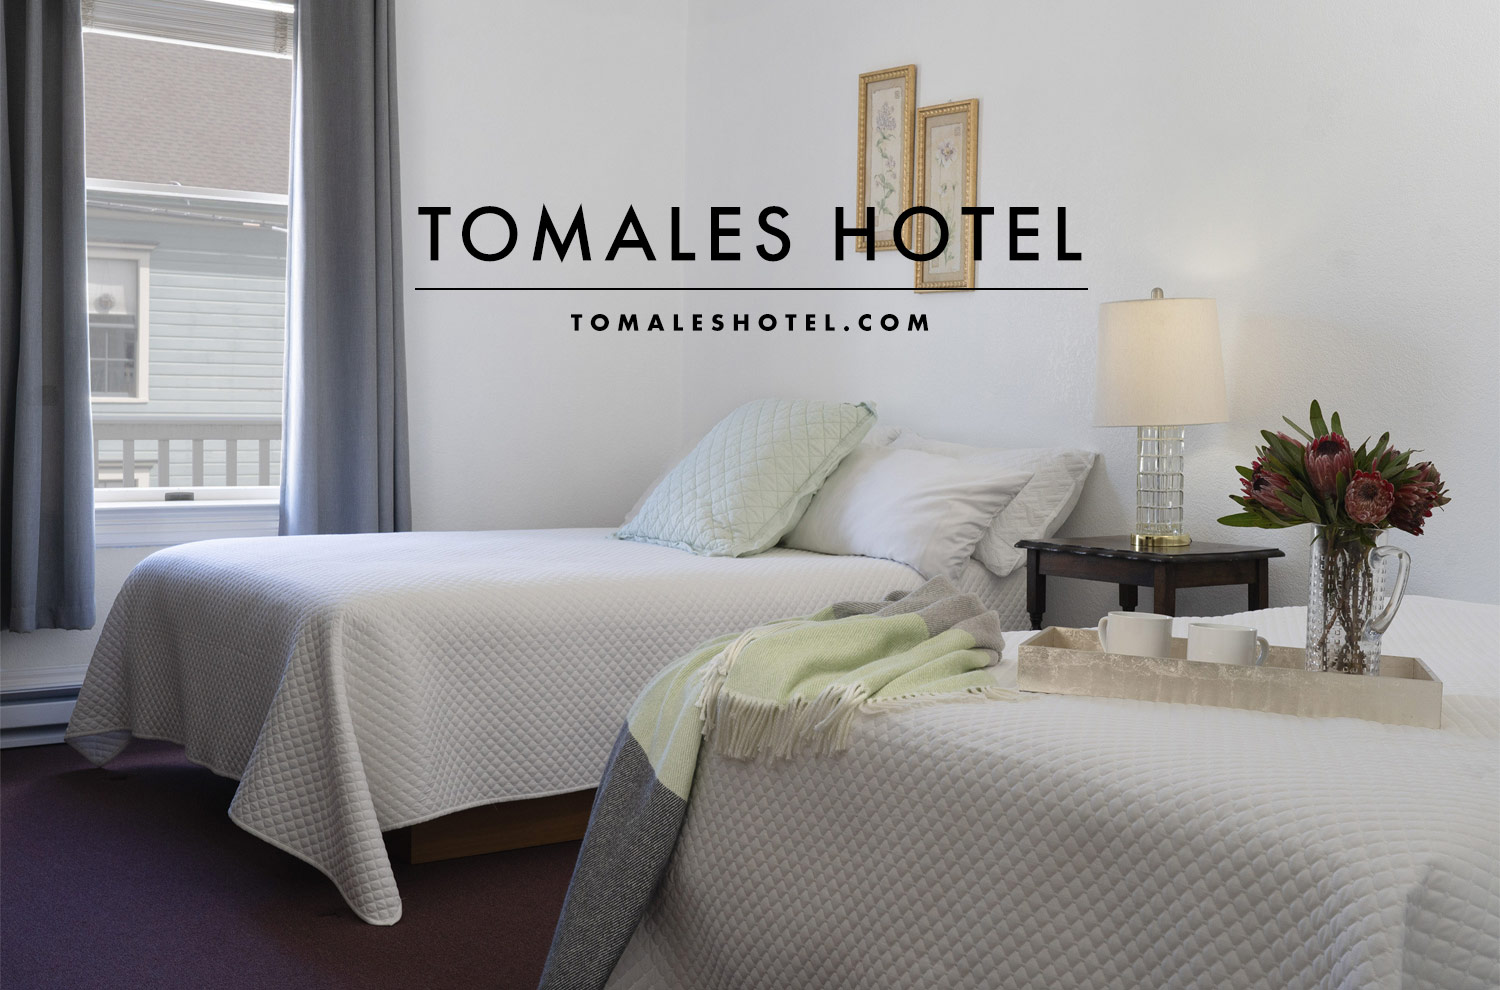 Tomales Hotel